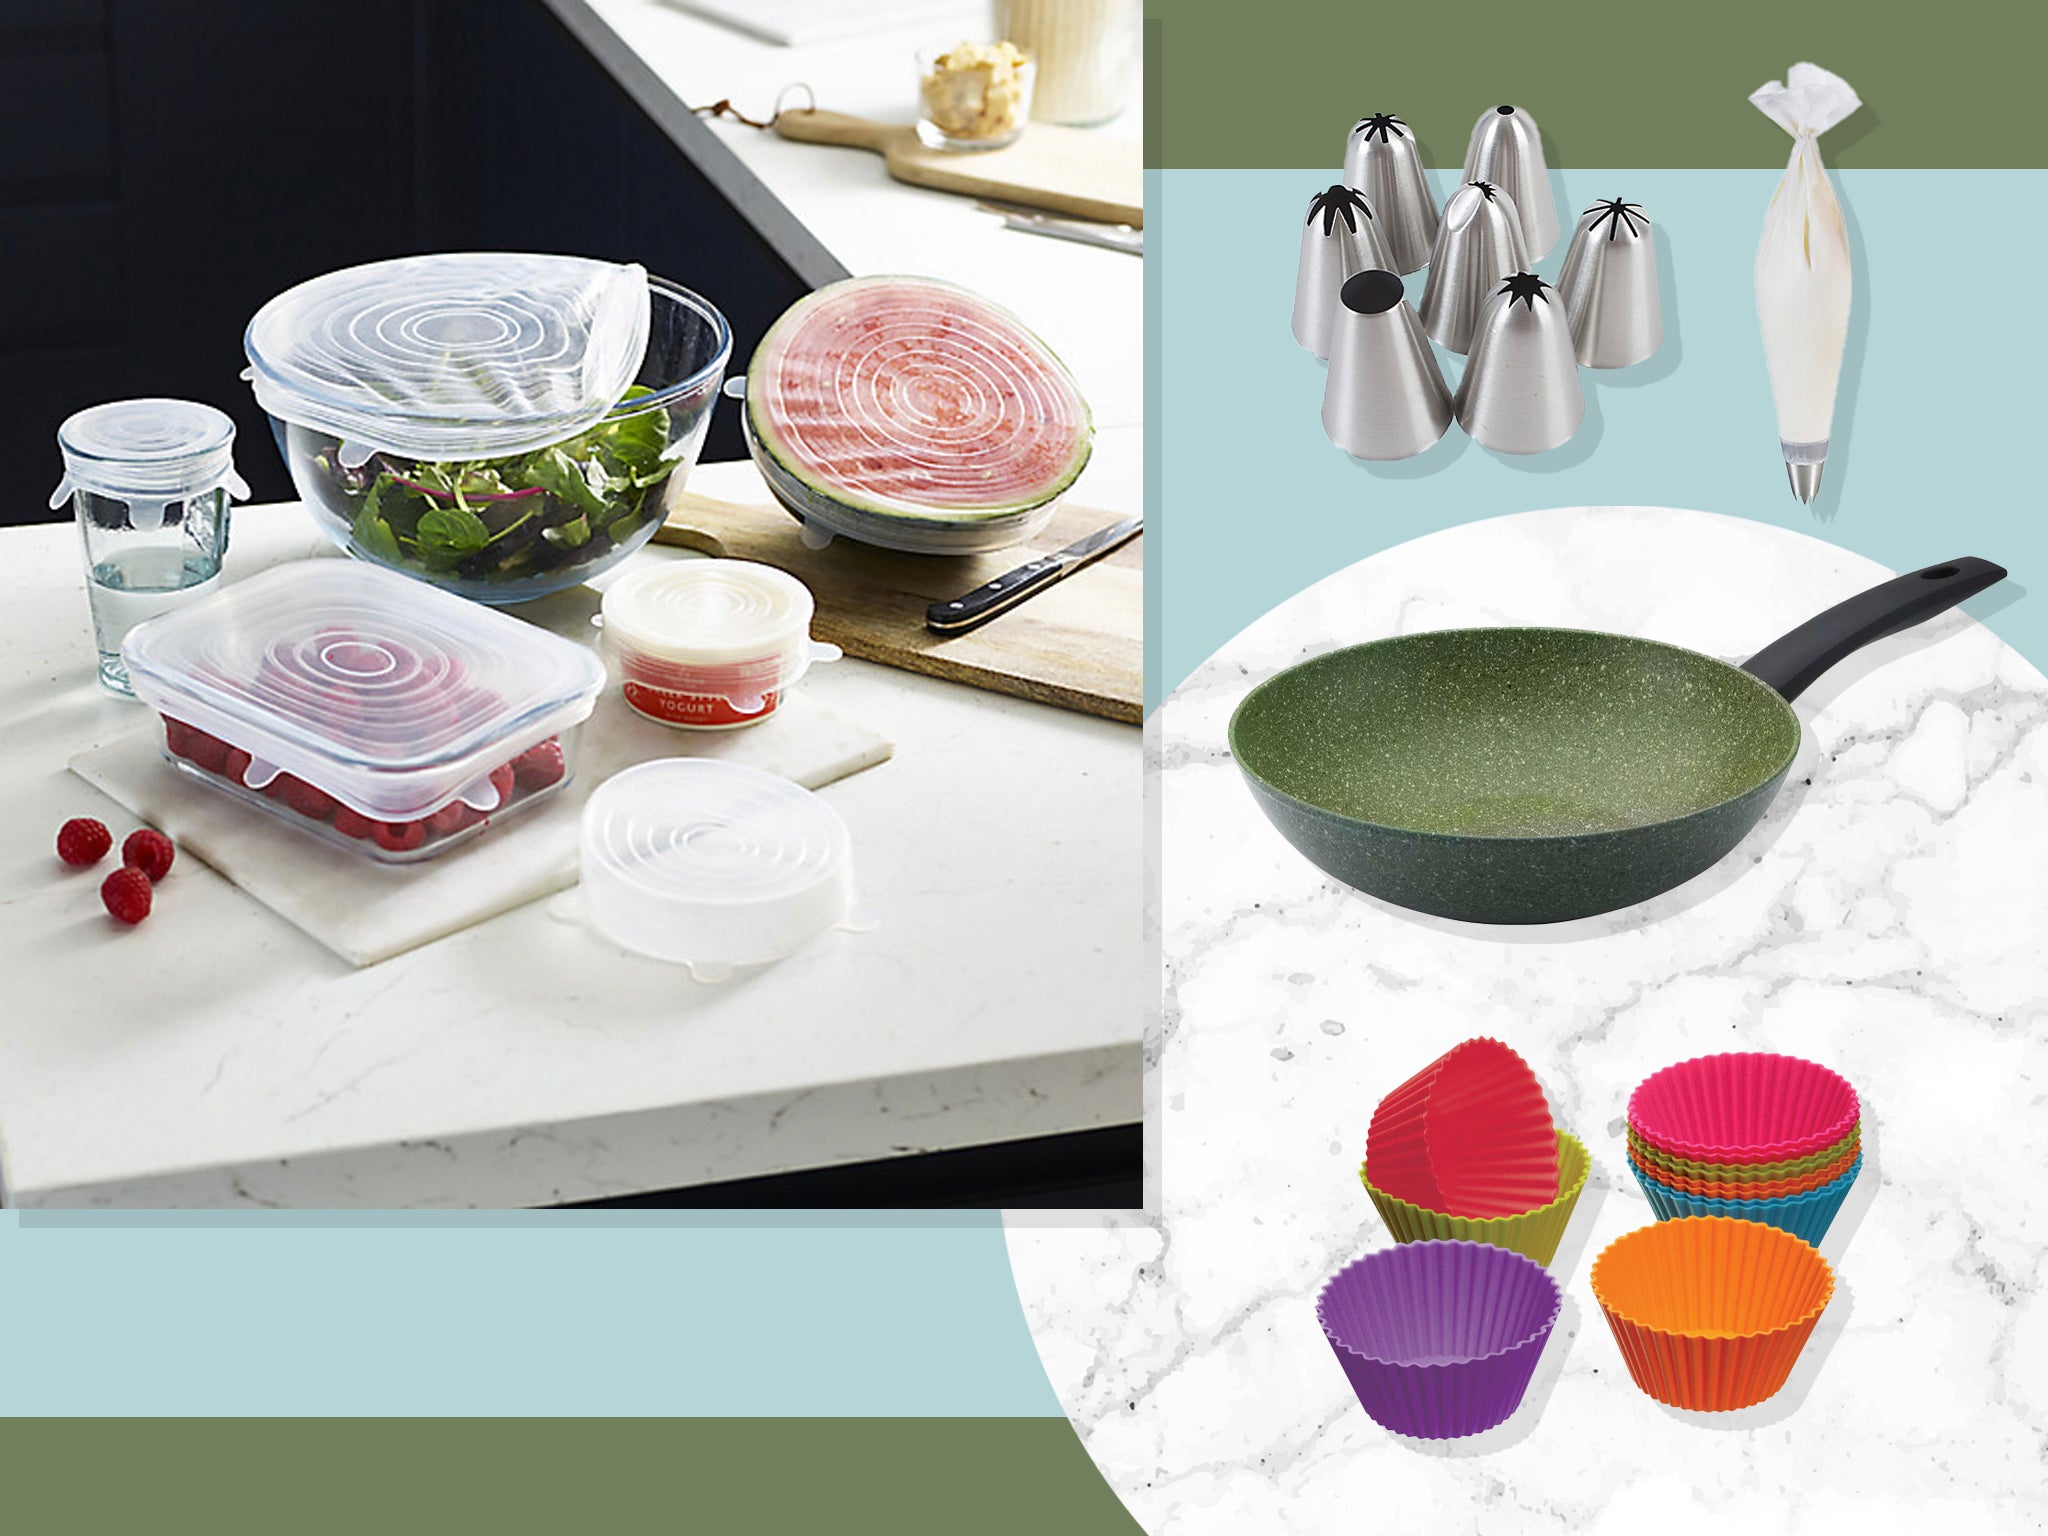 We recommend plant-based pans, silicone serving cases and more simple switches